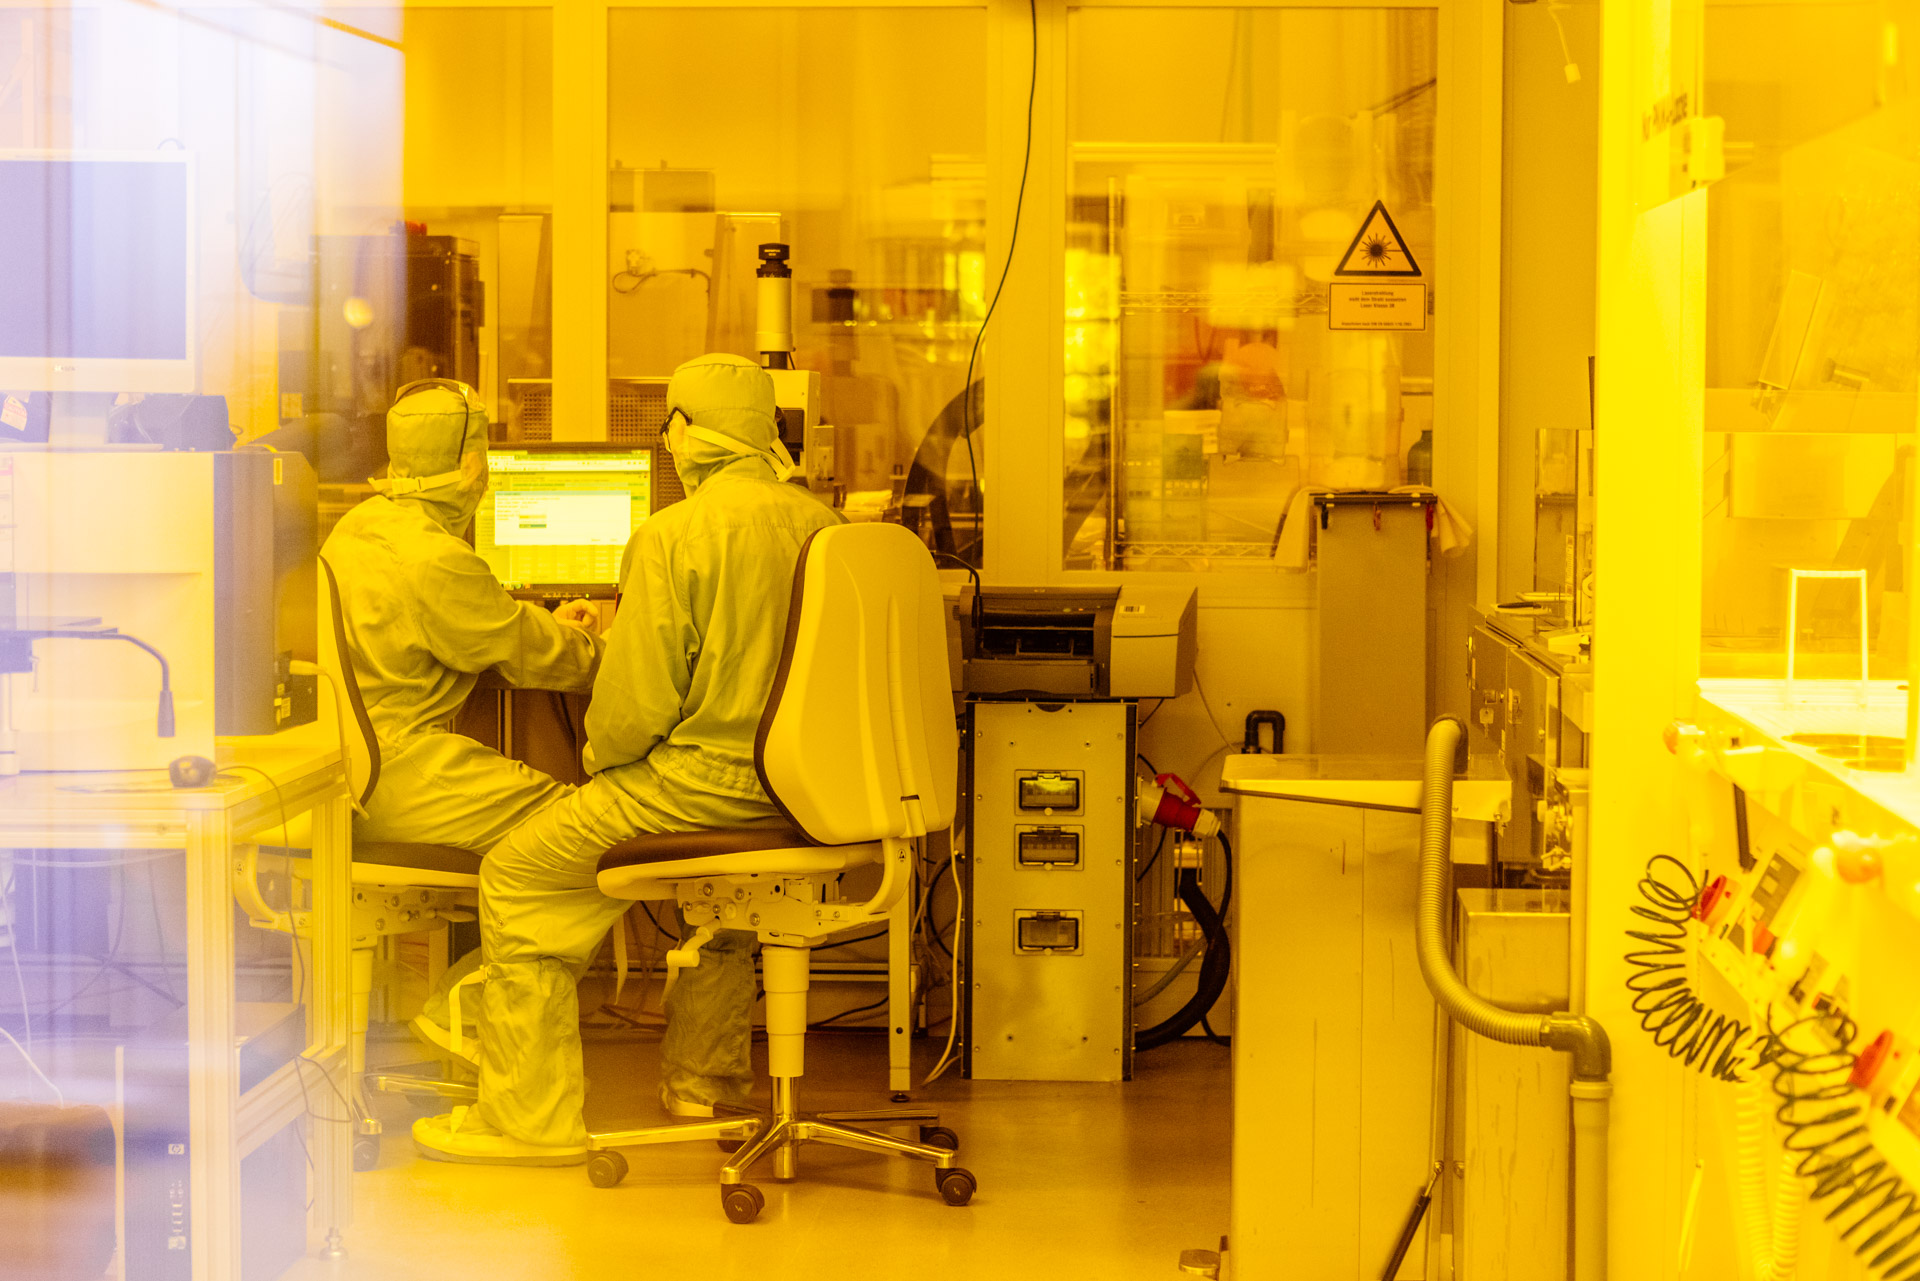 Researchers working in the cleanroom of AMO GmbH